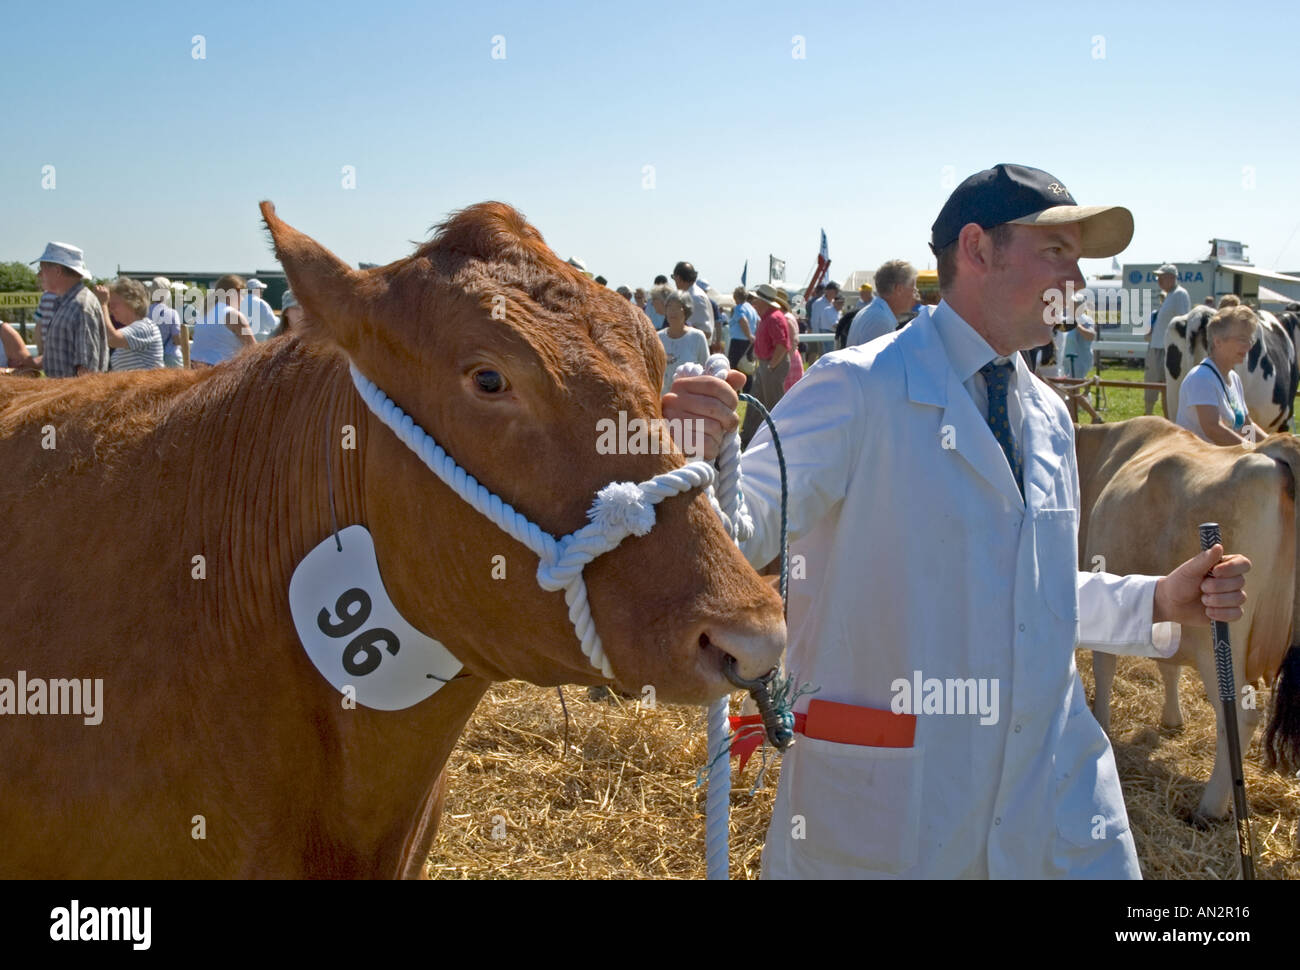 A Devonshire Bull with Handler at Stithians show in Cornwall England Stock Photo